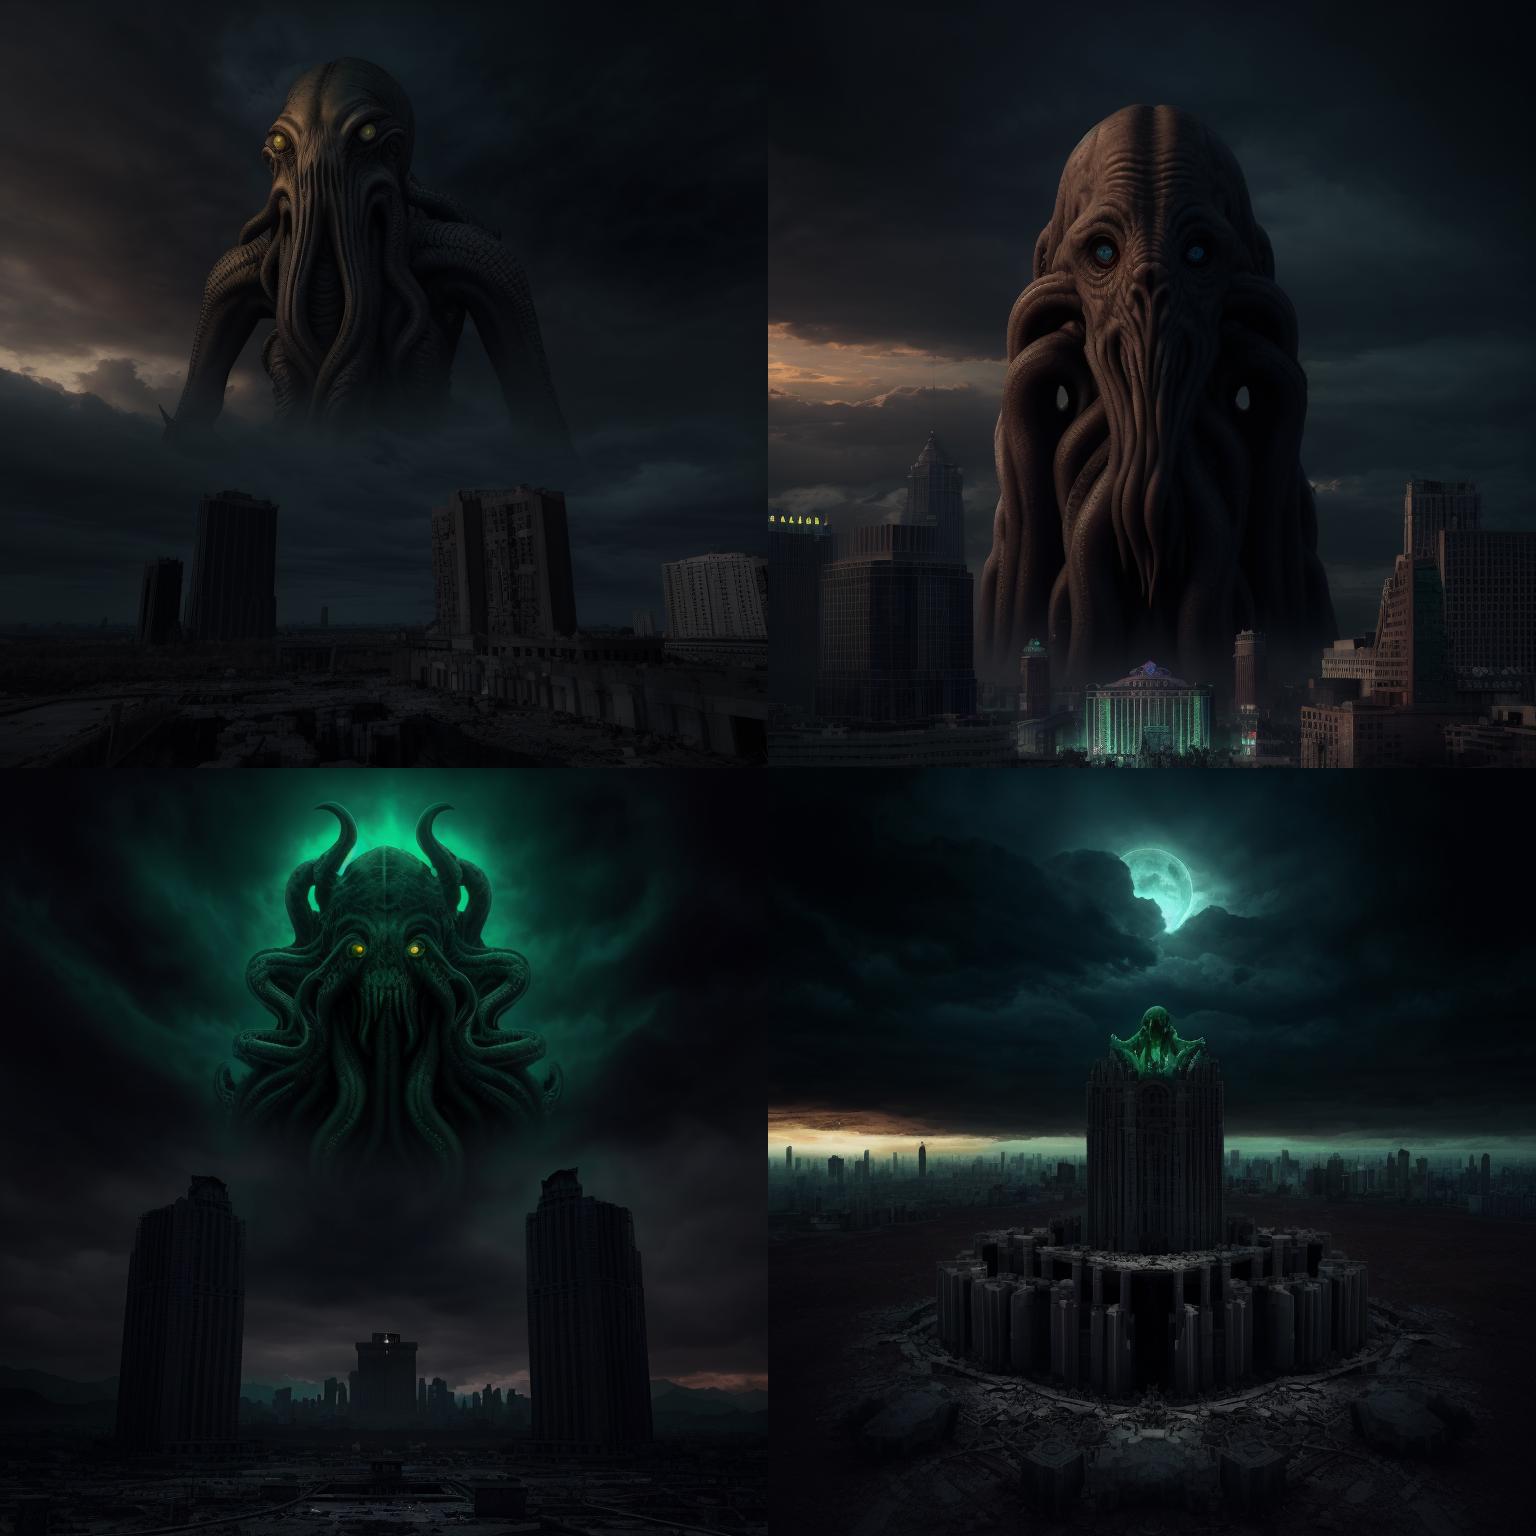 Lovecraftian Horror image by saturnalis